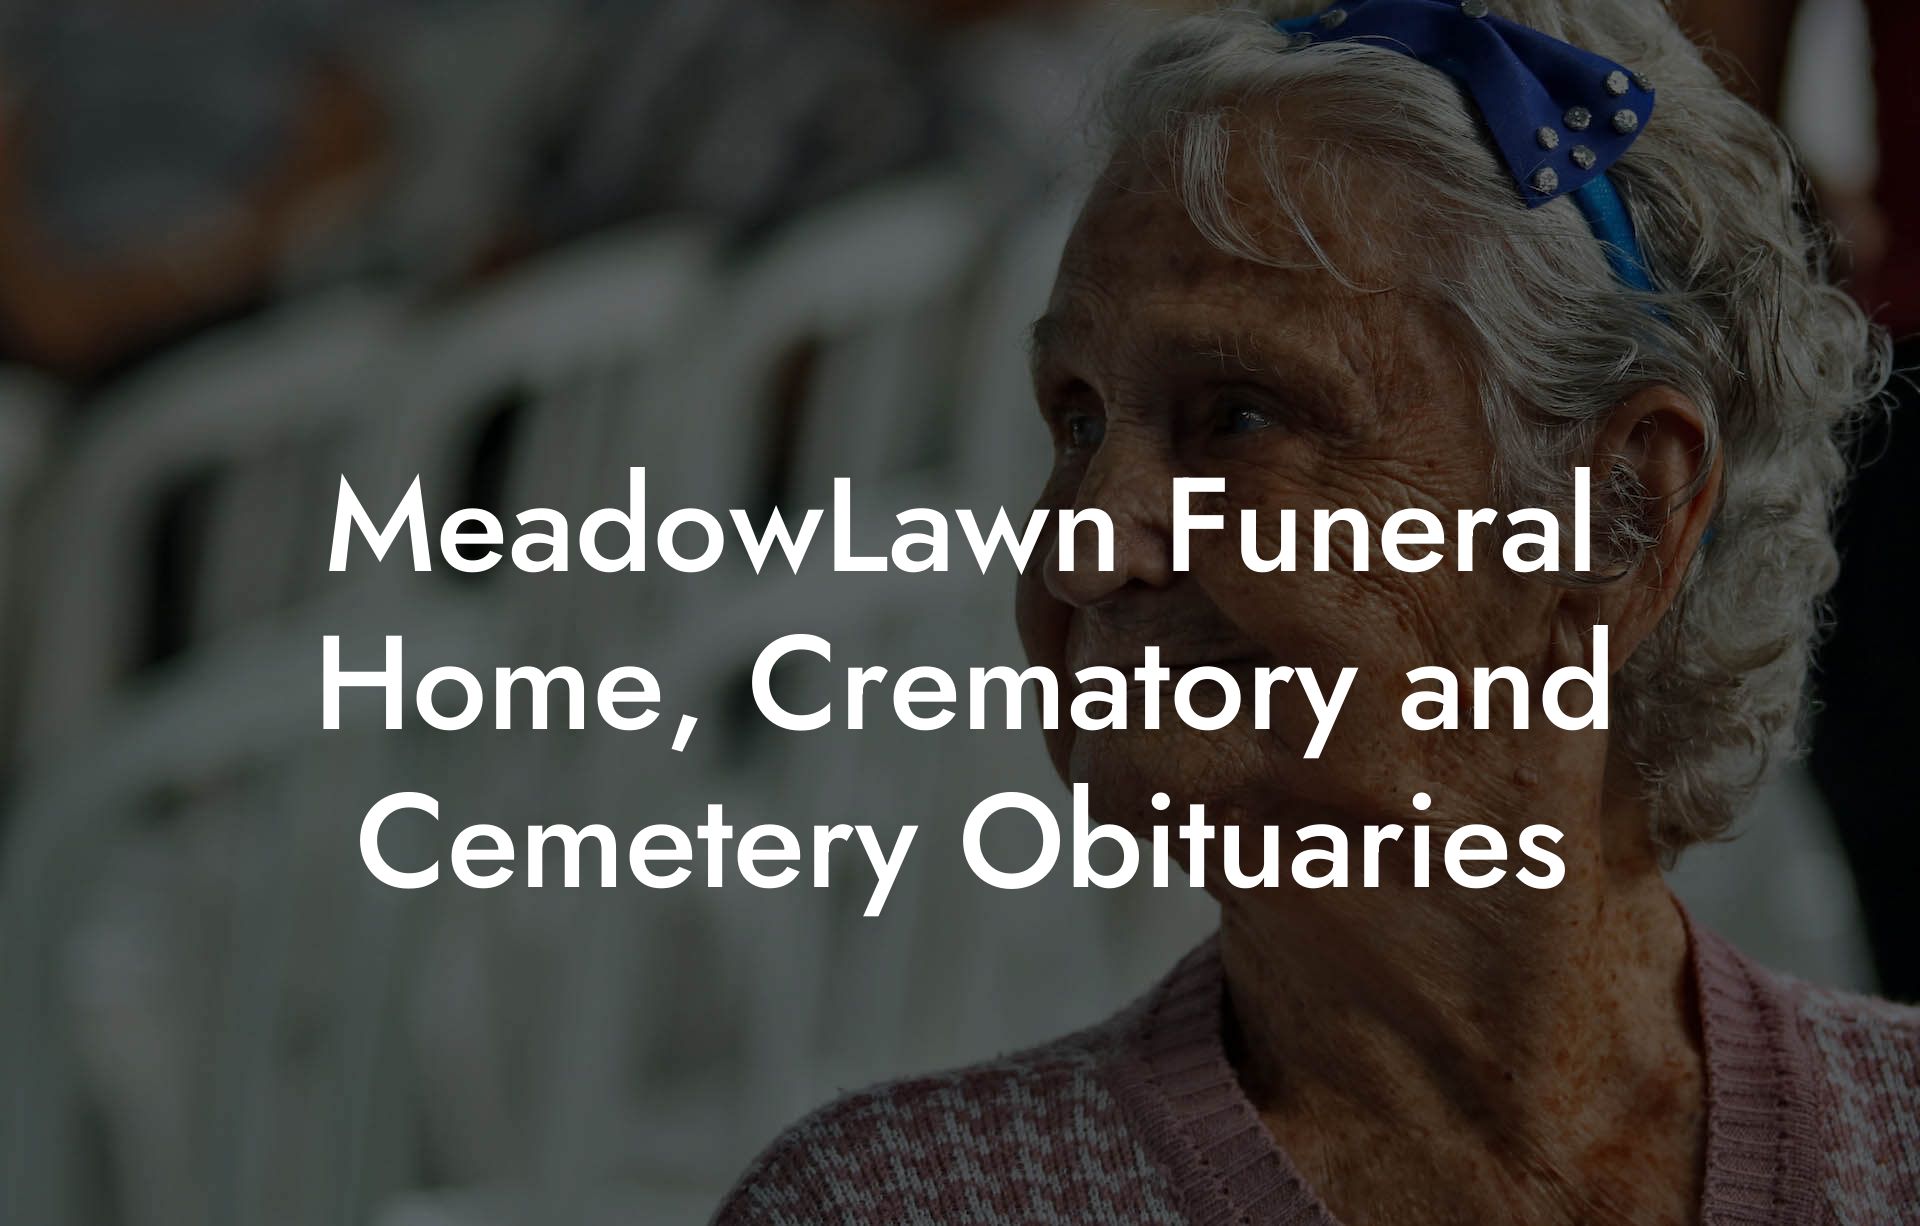 MeadowLawn Funeral Home, Crematory and Cemetery Obituaries